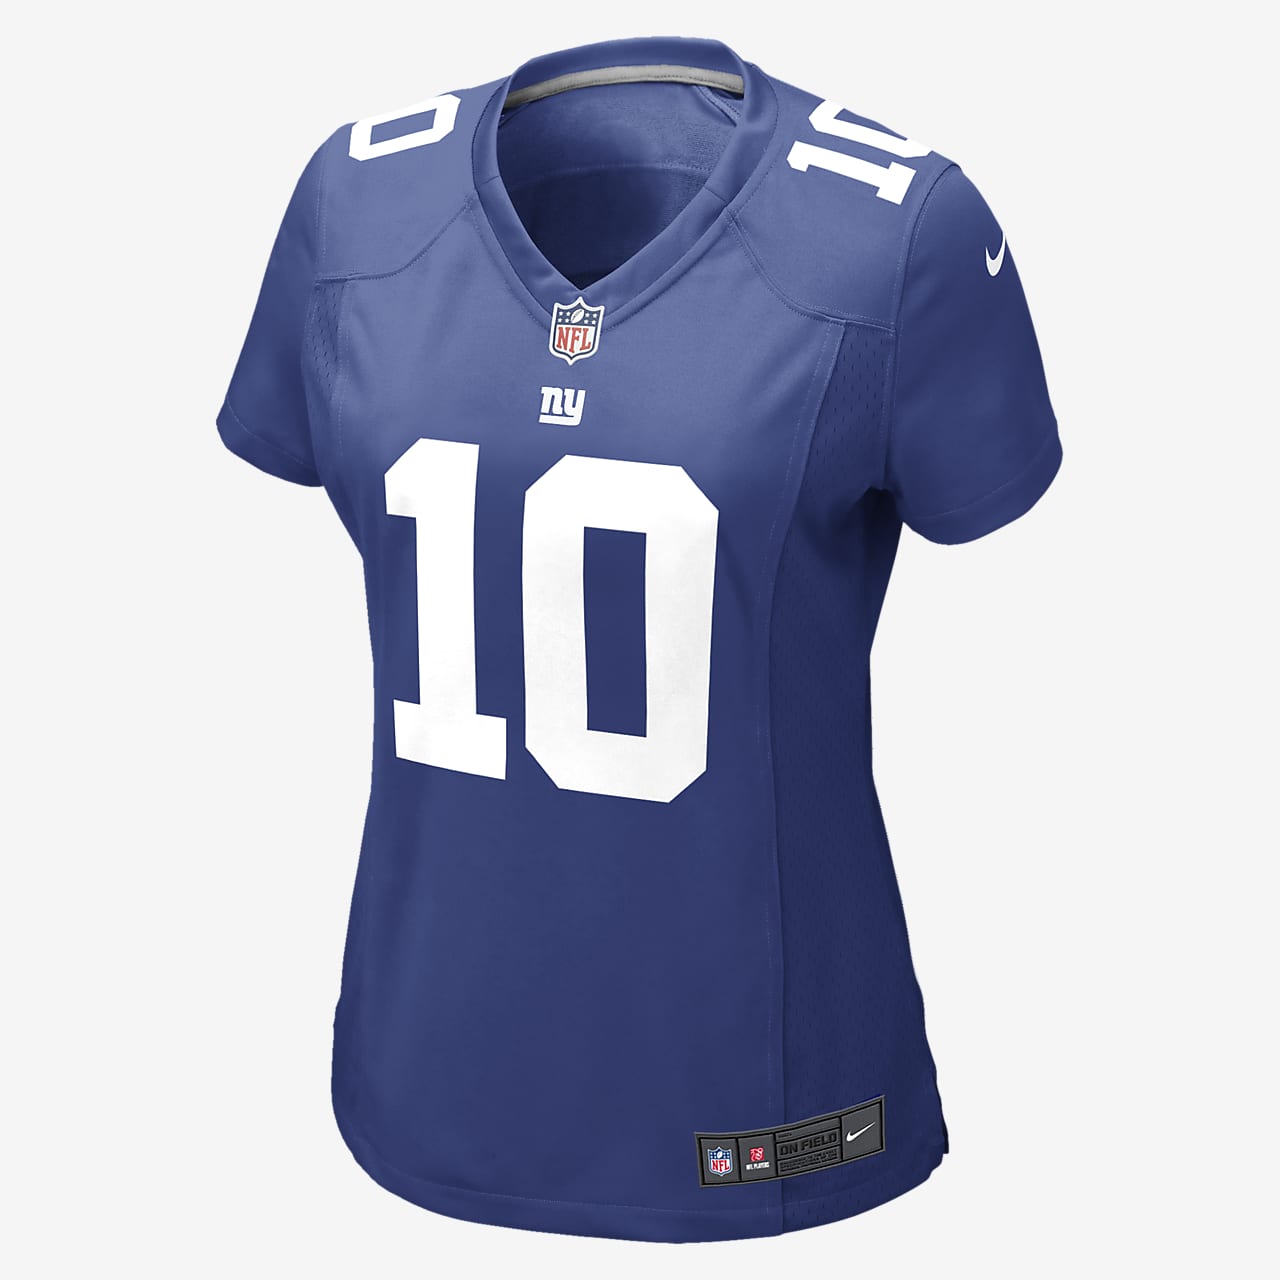 manning giants jersey